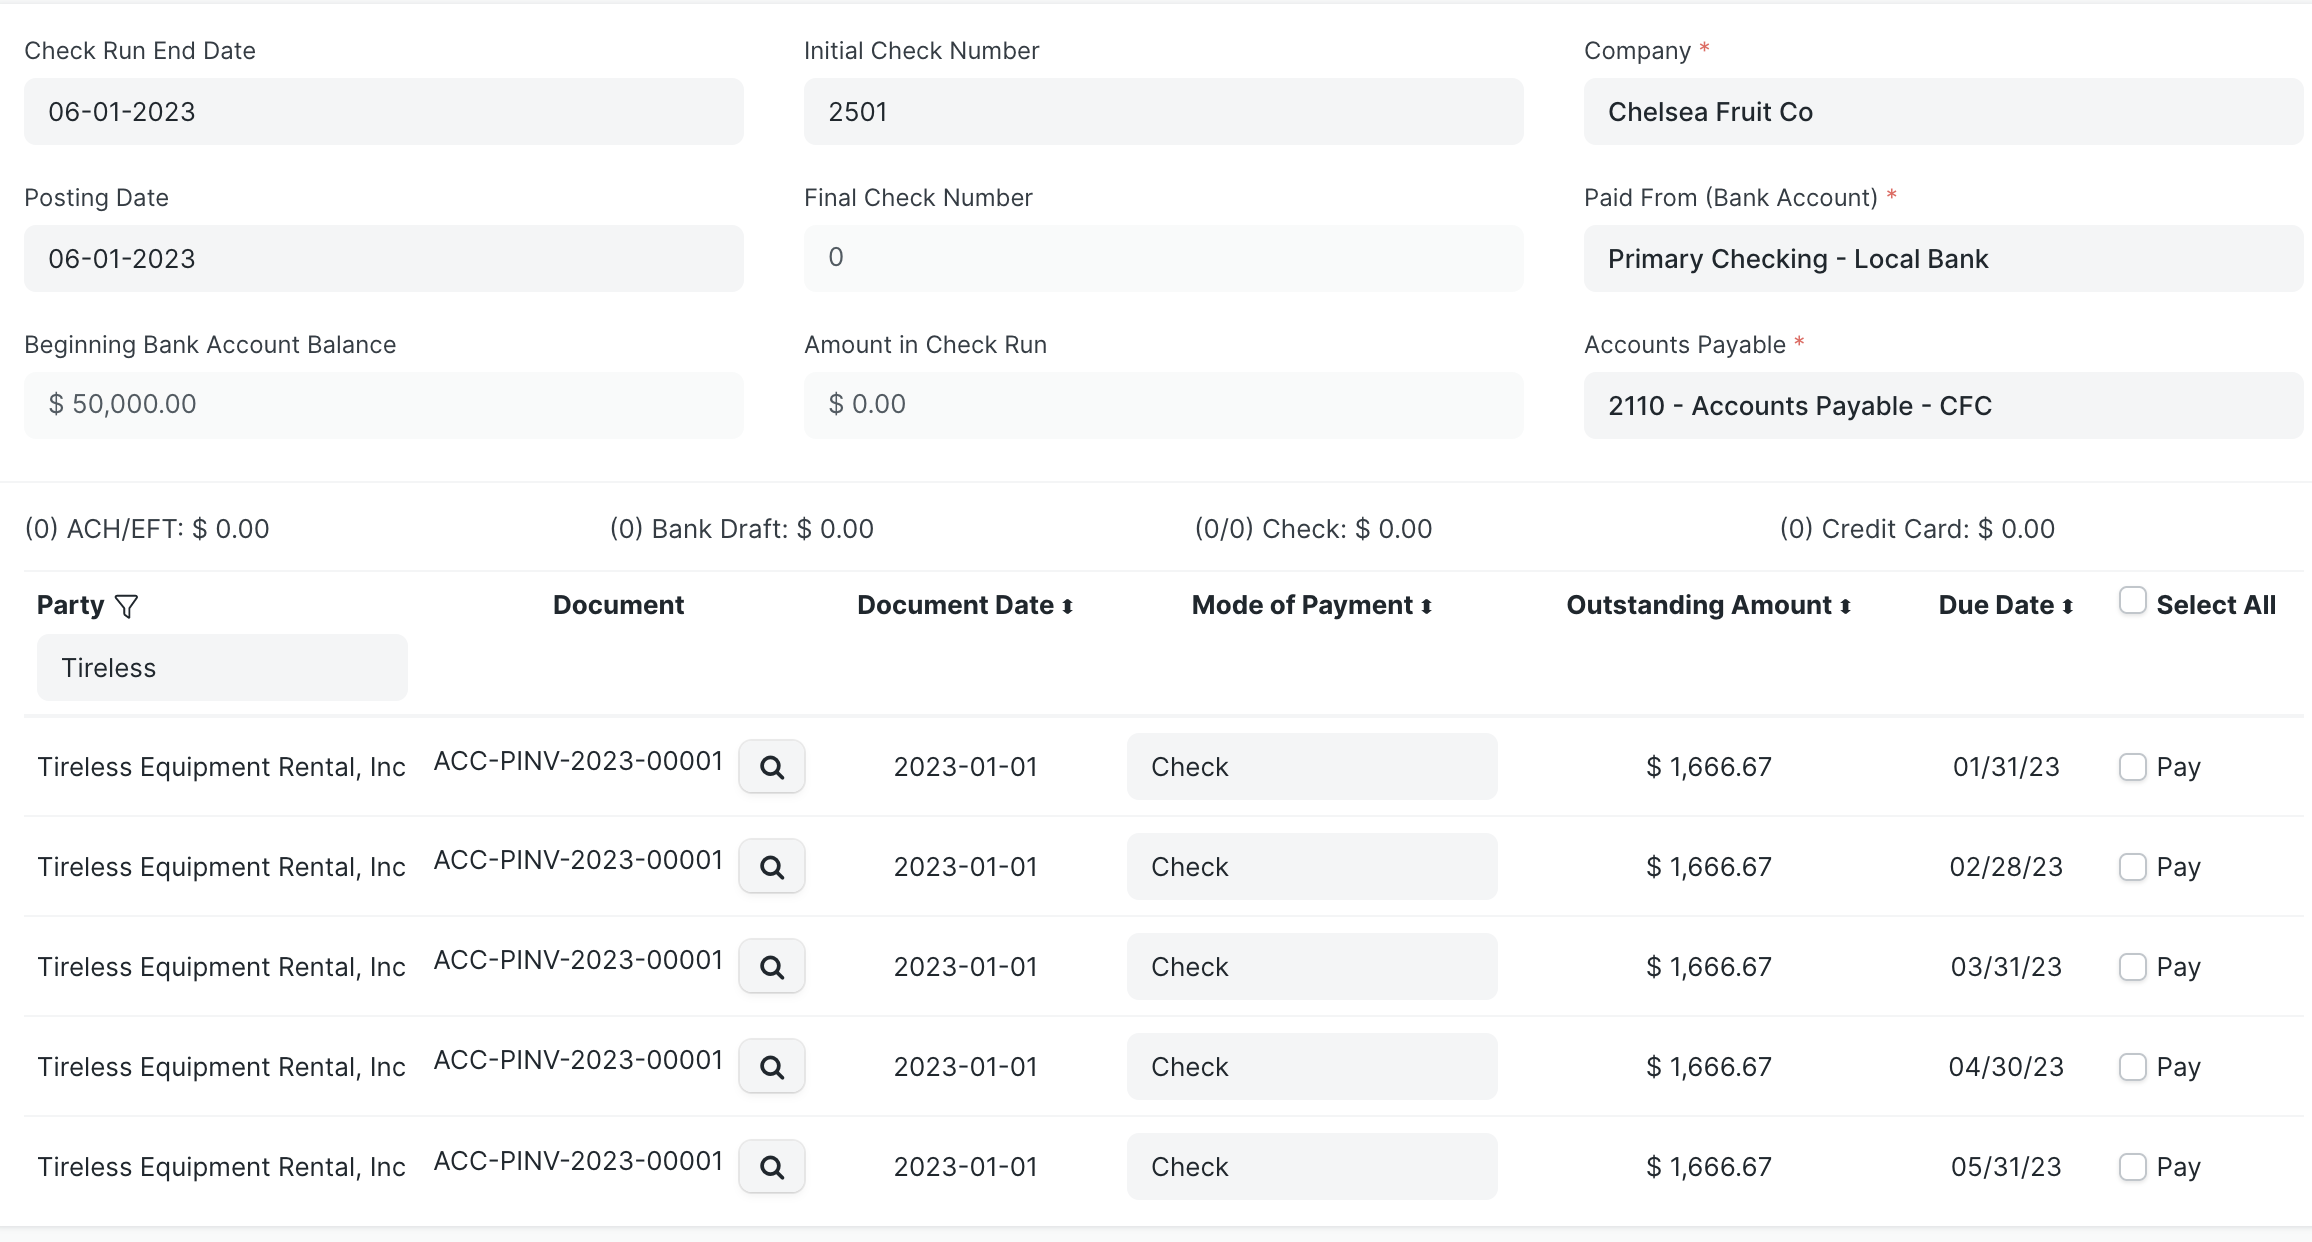 Screen shot of a Check Run's transactions for Tireless Equipment Rental, Inc from the beginning of the year through May. It shows separate transactions for each month for $1,666.67 each, which reflects the monthly payments due on the Payment Schedule.